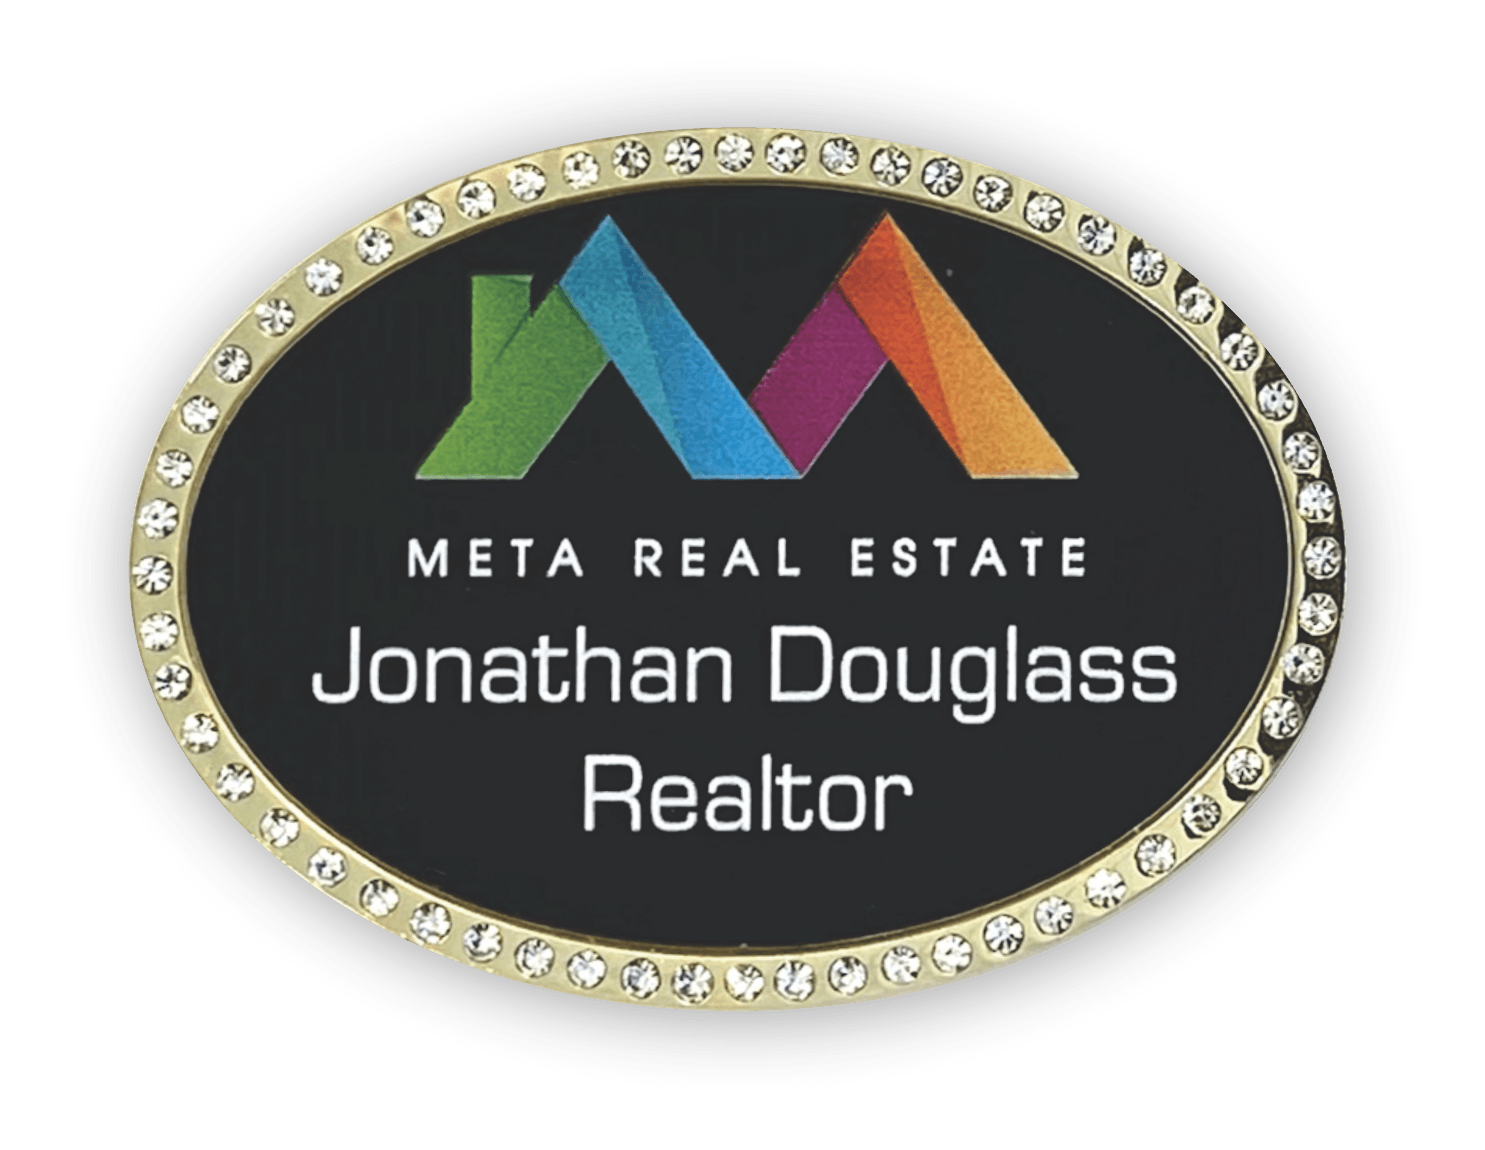 Oval gold bling badge with multicolored realtor logo